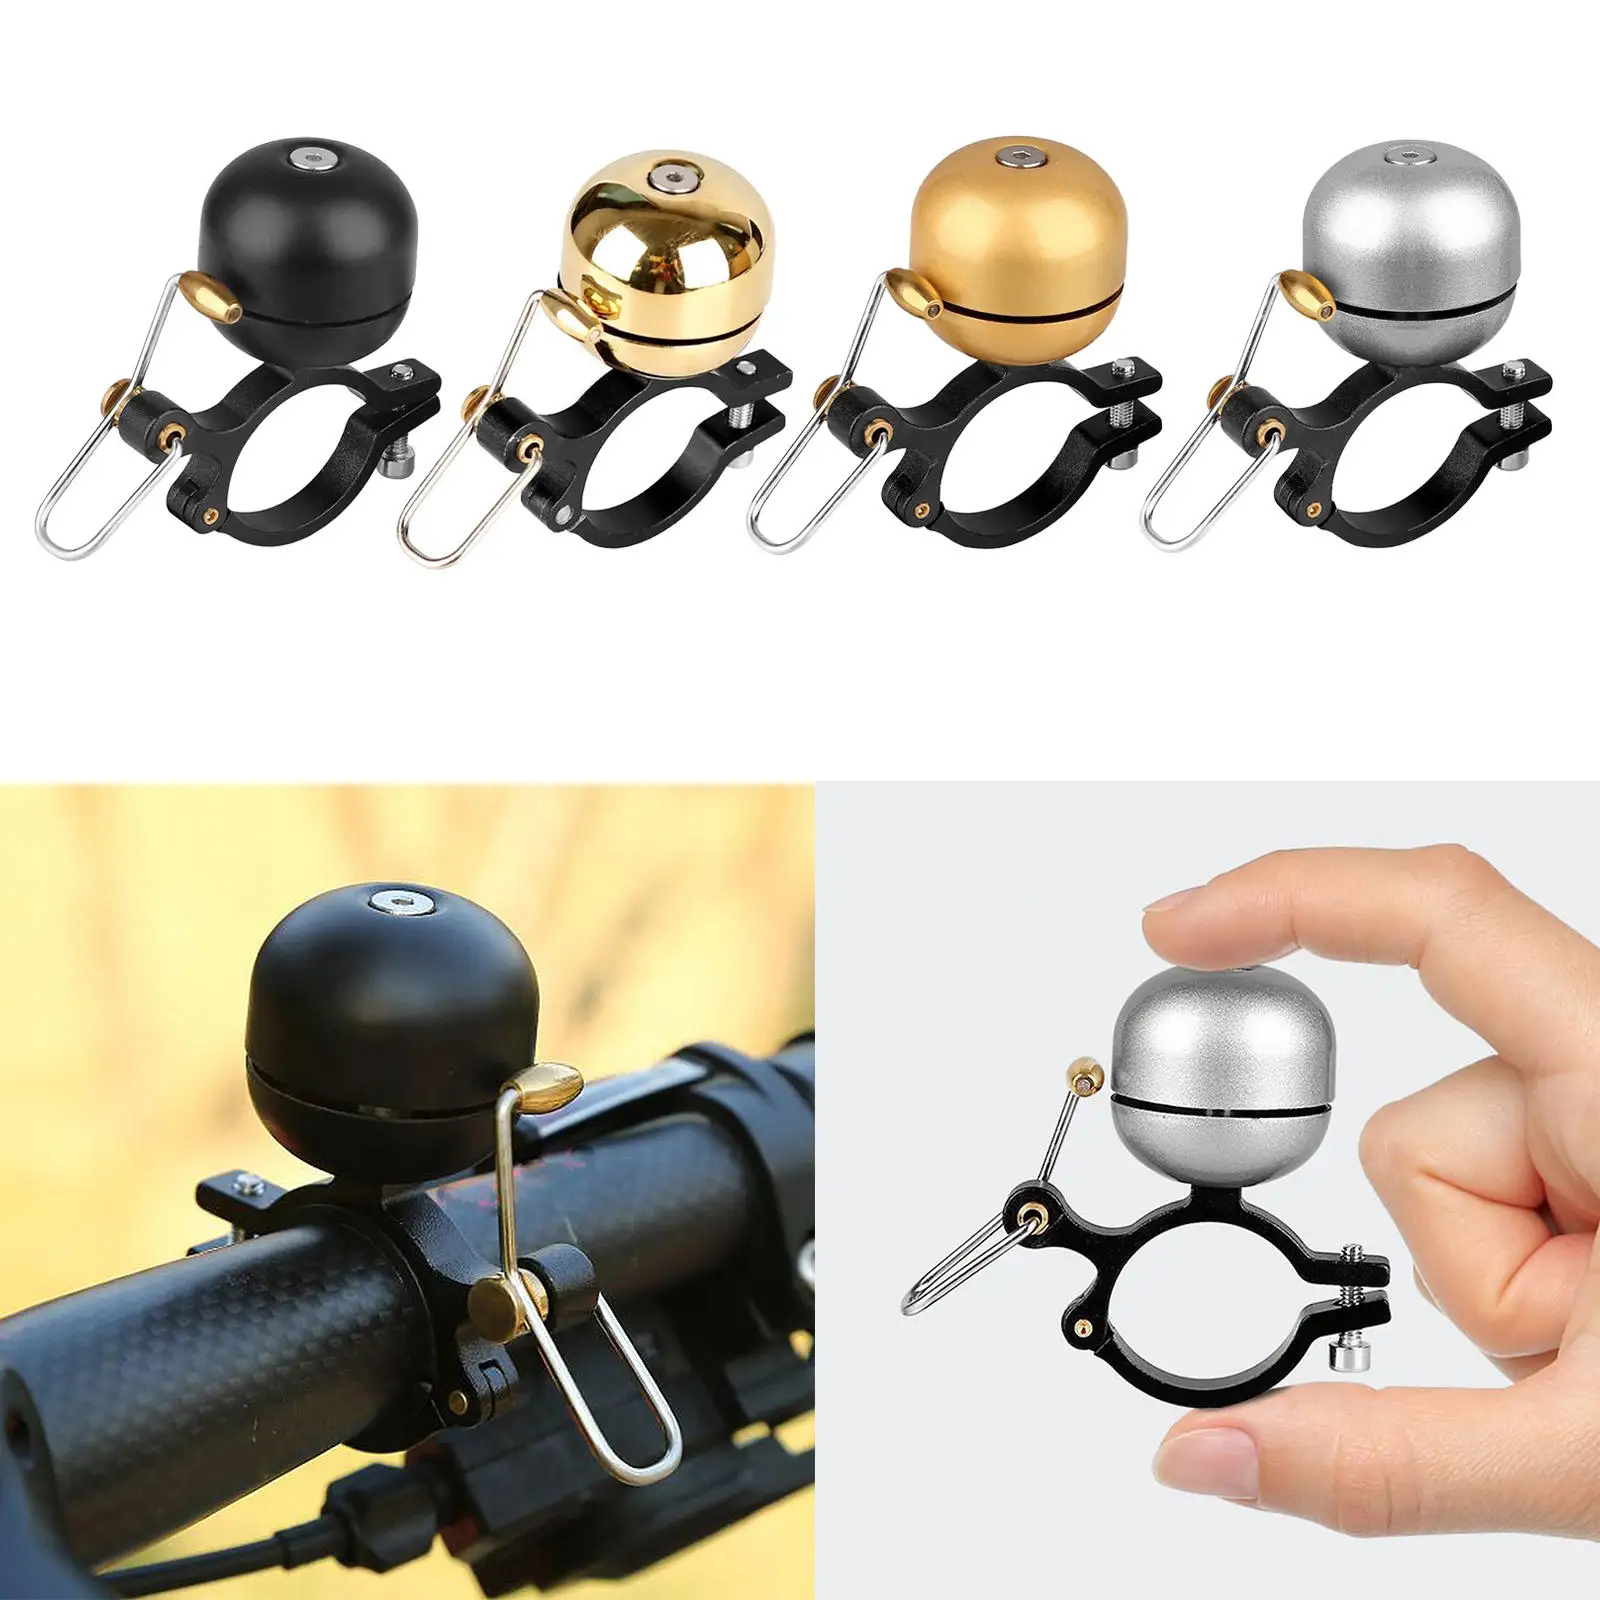 Retro Bicycle Bell Crisp Sound Aluminum Alloy Light Weight Compact Bell for Balance Bike/ Mountain/ Road Bike/ Fixed Bike